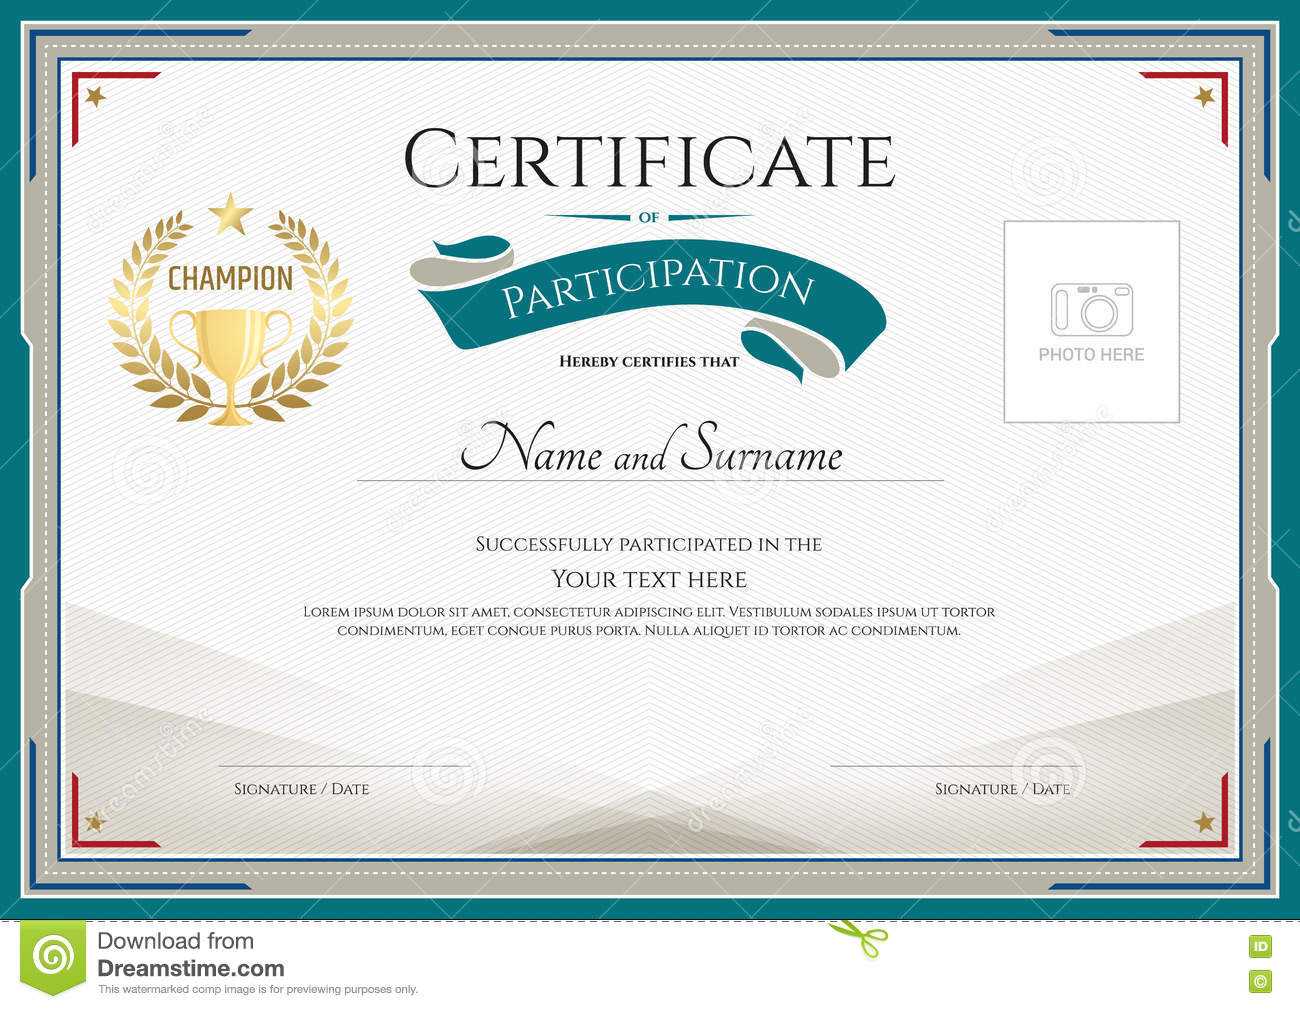 Certificate Of Participation Template With Green Broder Inside Certificate Of Participation Template Word